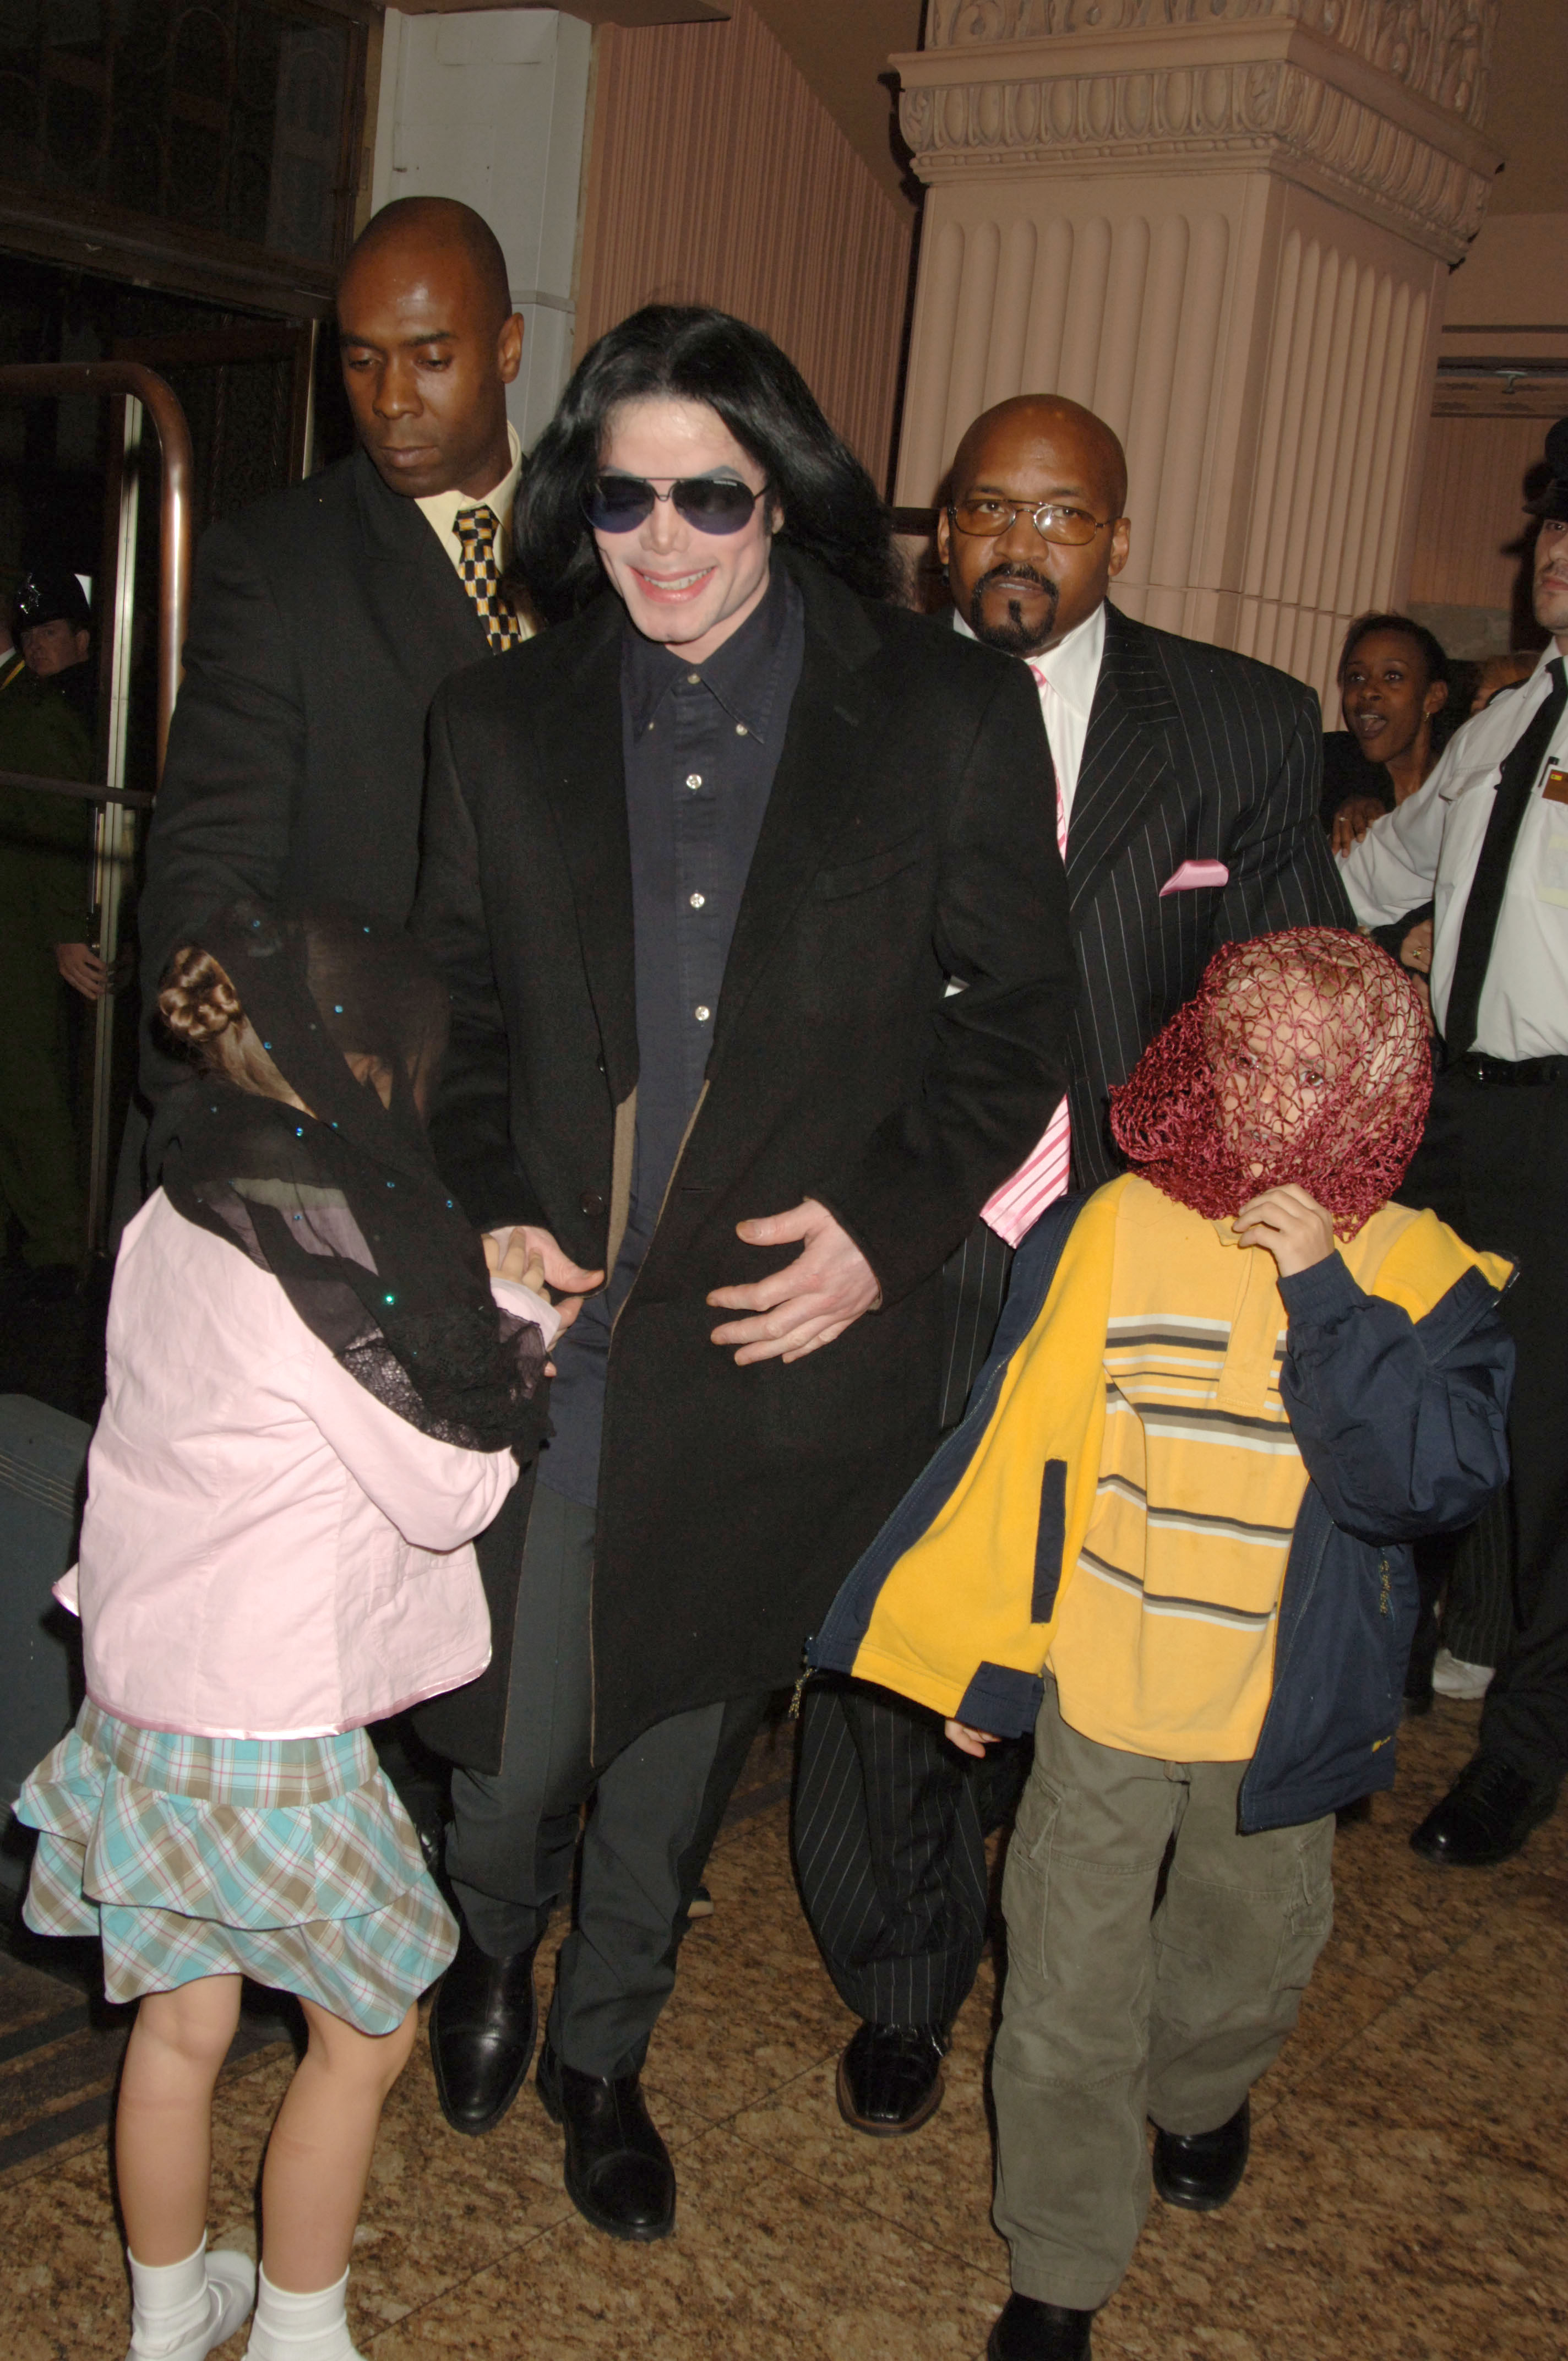 Michael Jackson walks with his children, Prince and Paris, while visiting Harrods on October 12, 2005, in London, England | Source: Getty Images